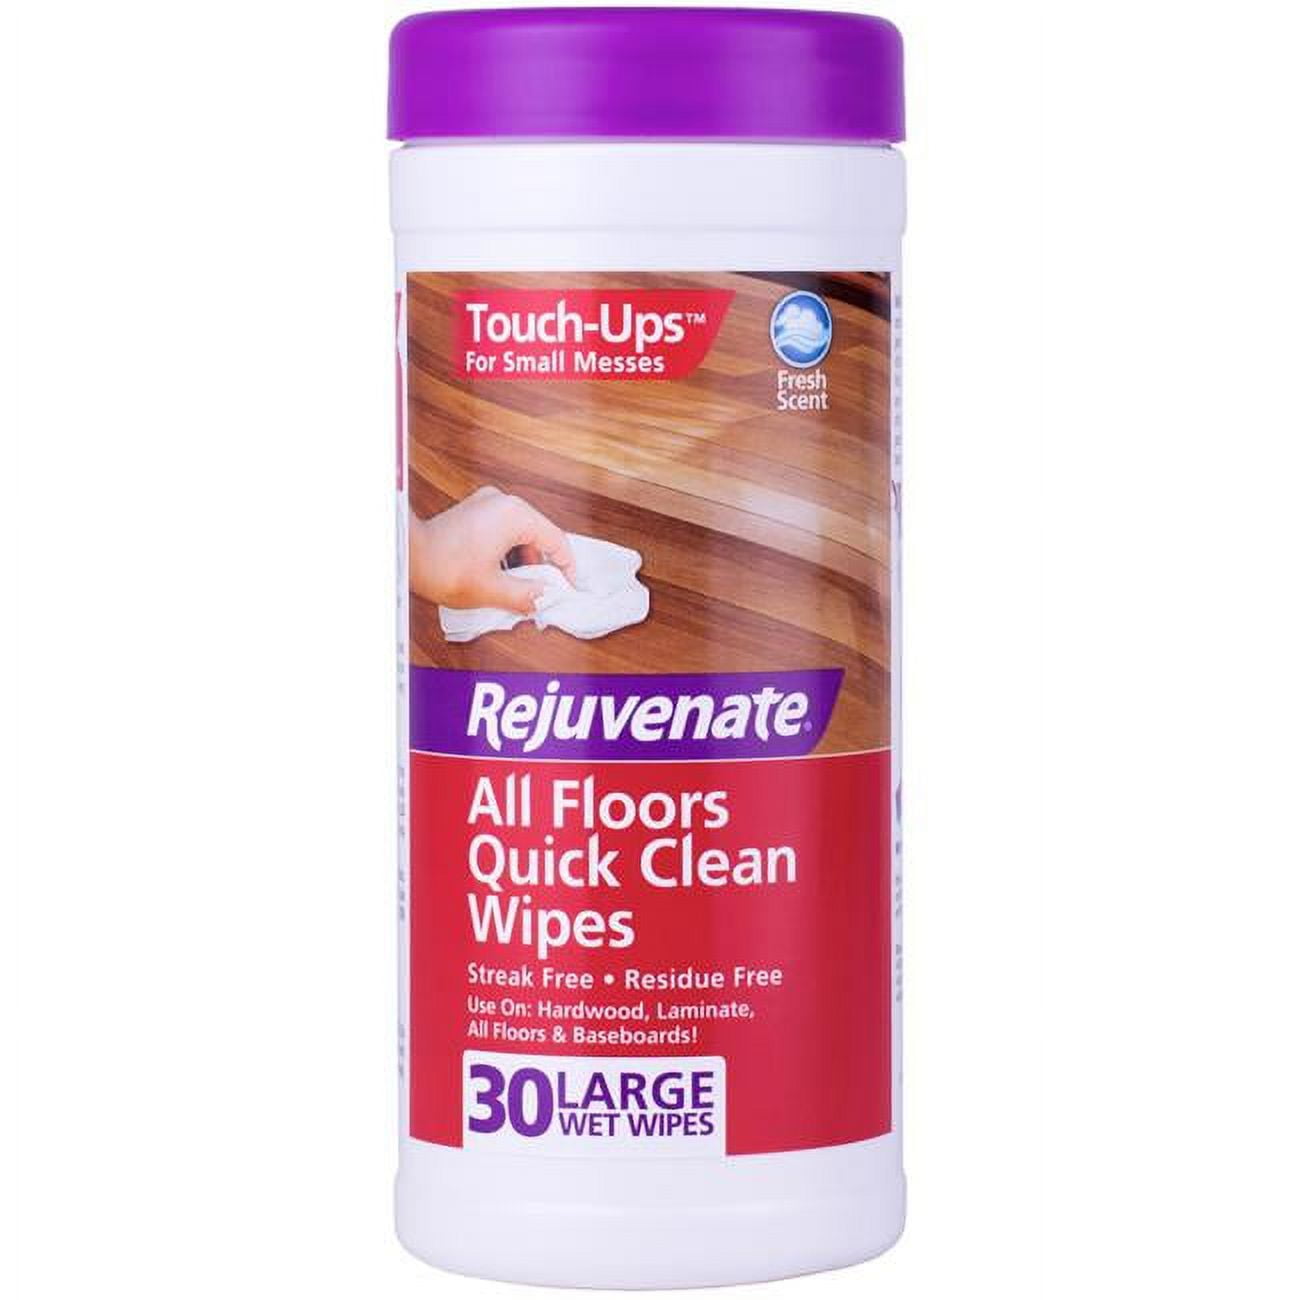 Picture of Rejuvenate 1006310 8 x 7 in. Plant-Based Pulp Floor & Furniture Cleaning Wipes - Pack of 30